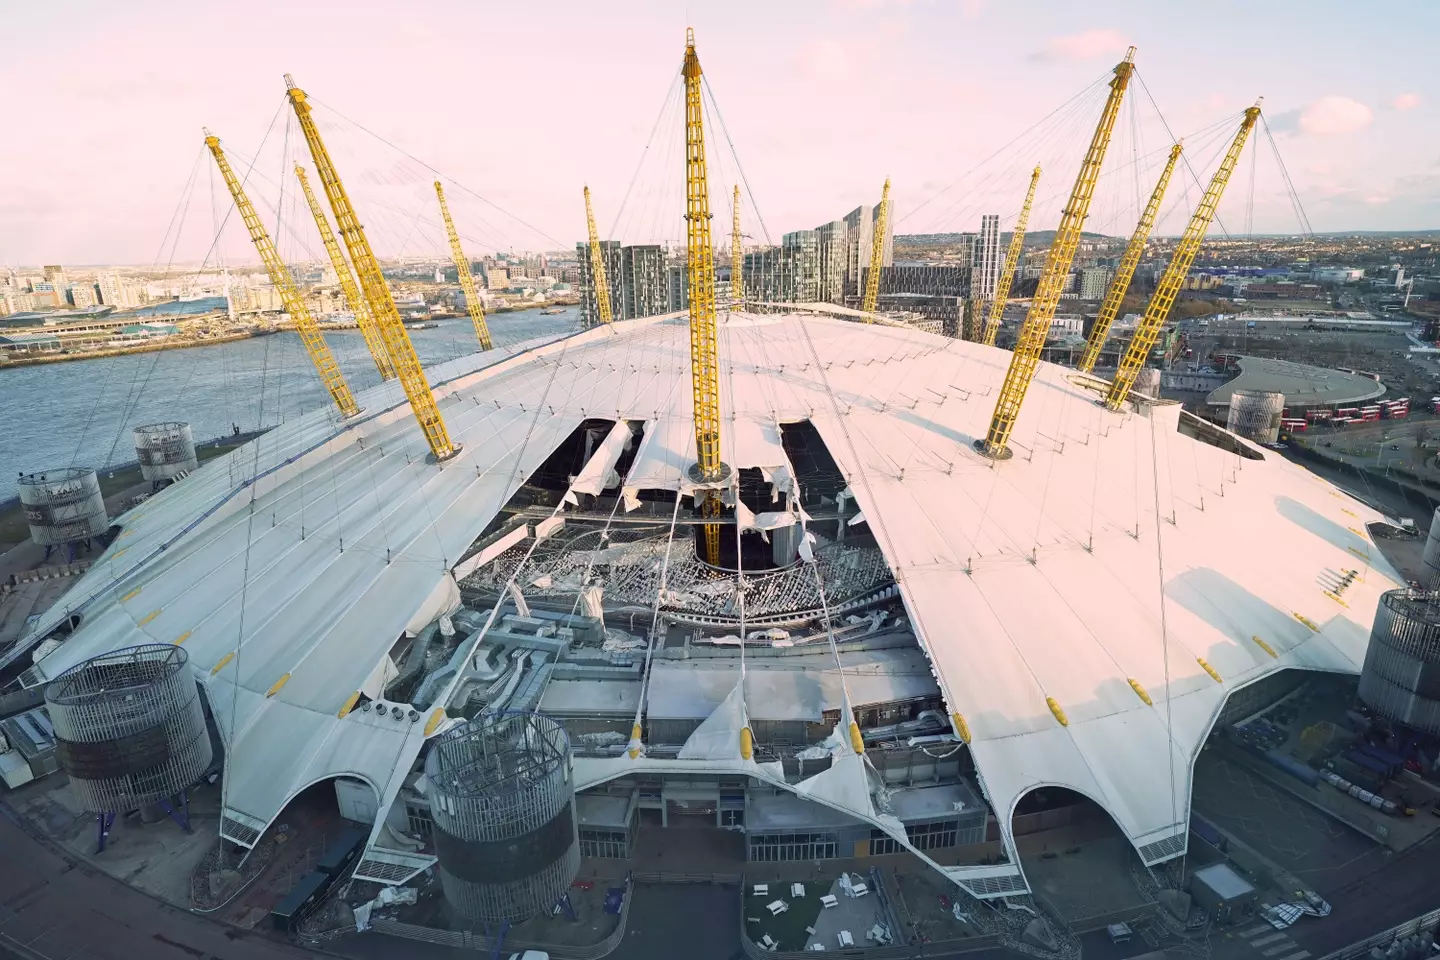 The roof of the O2 arena was ripped off by the extreme weather.